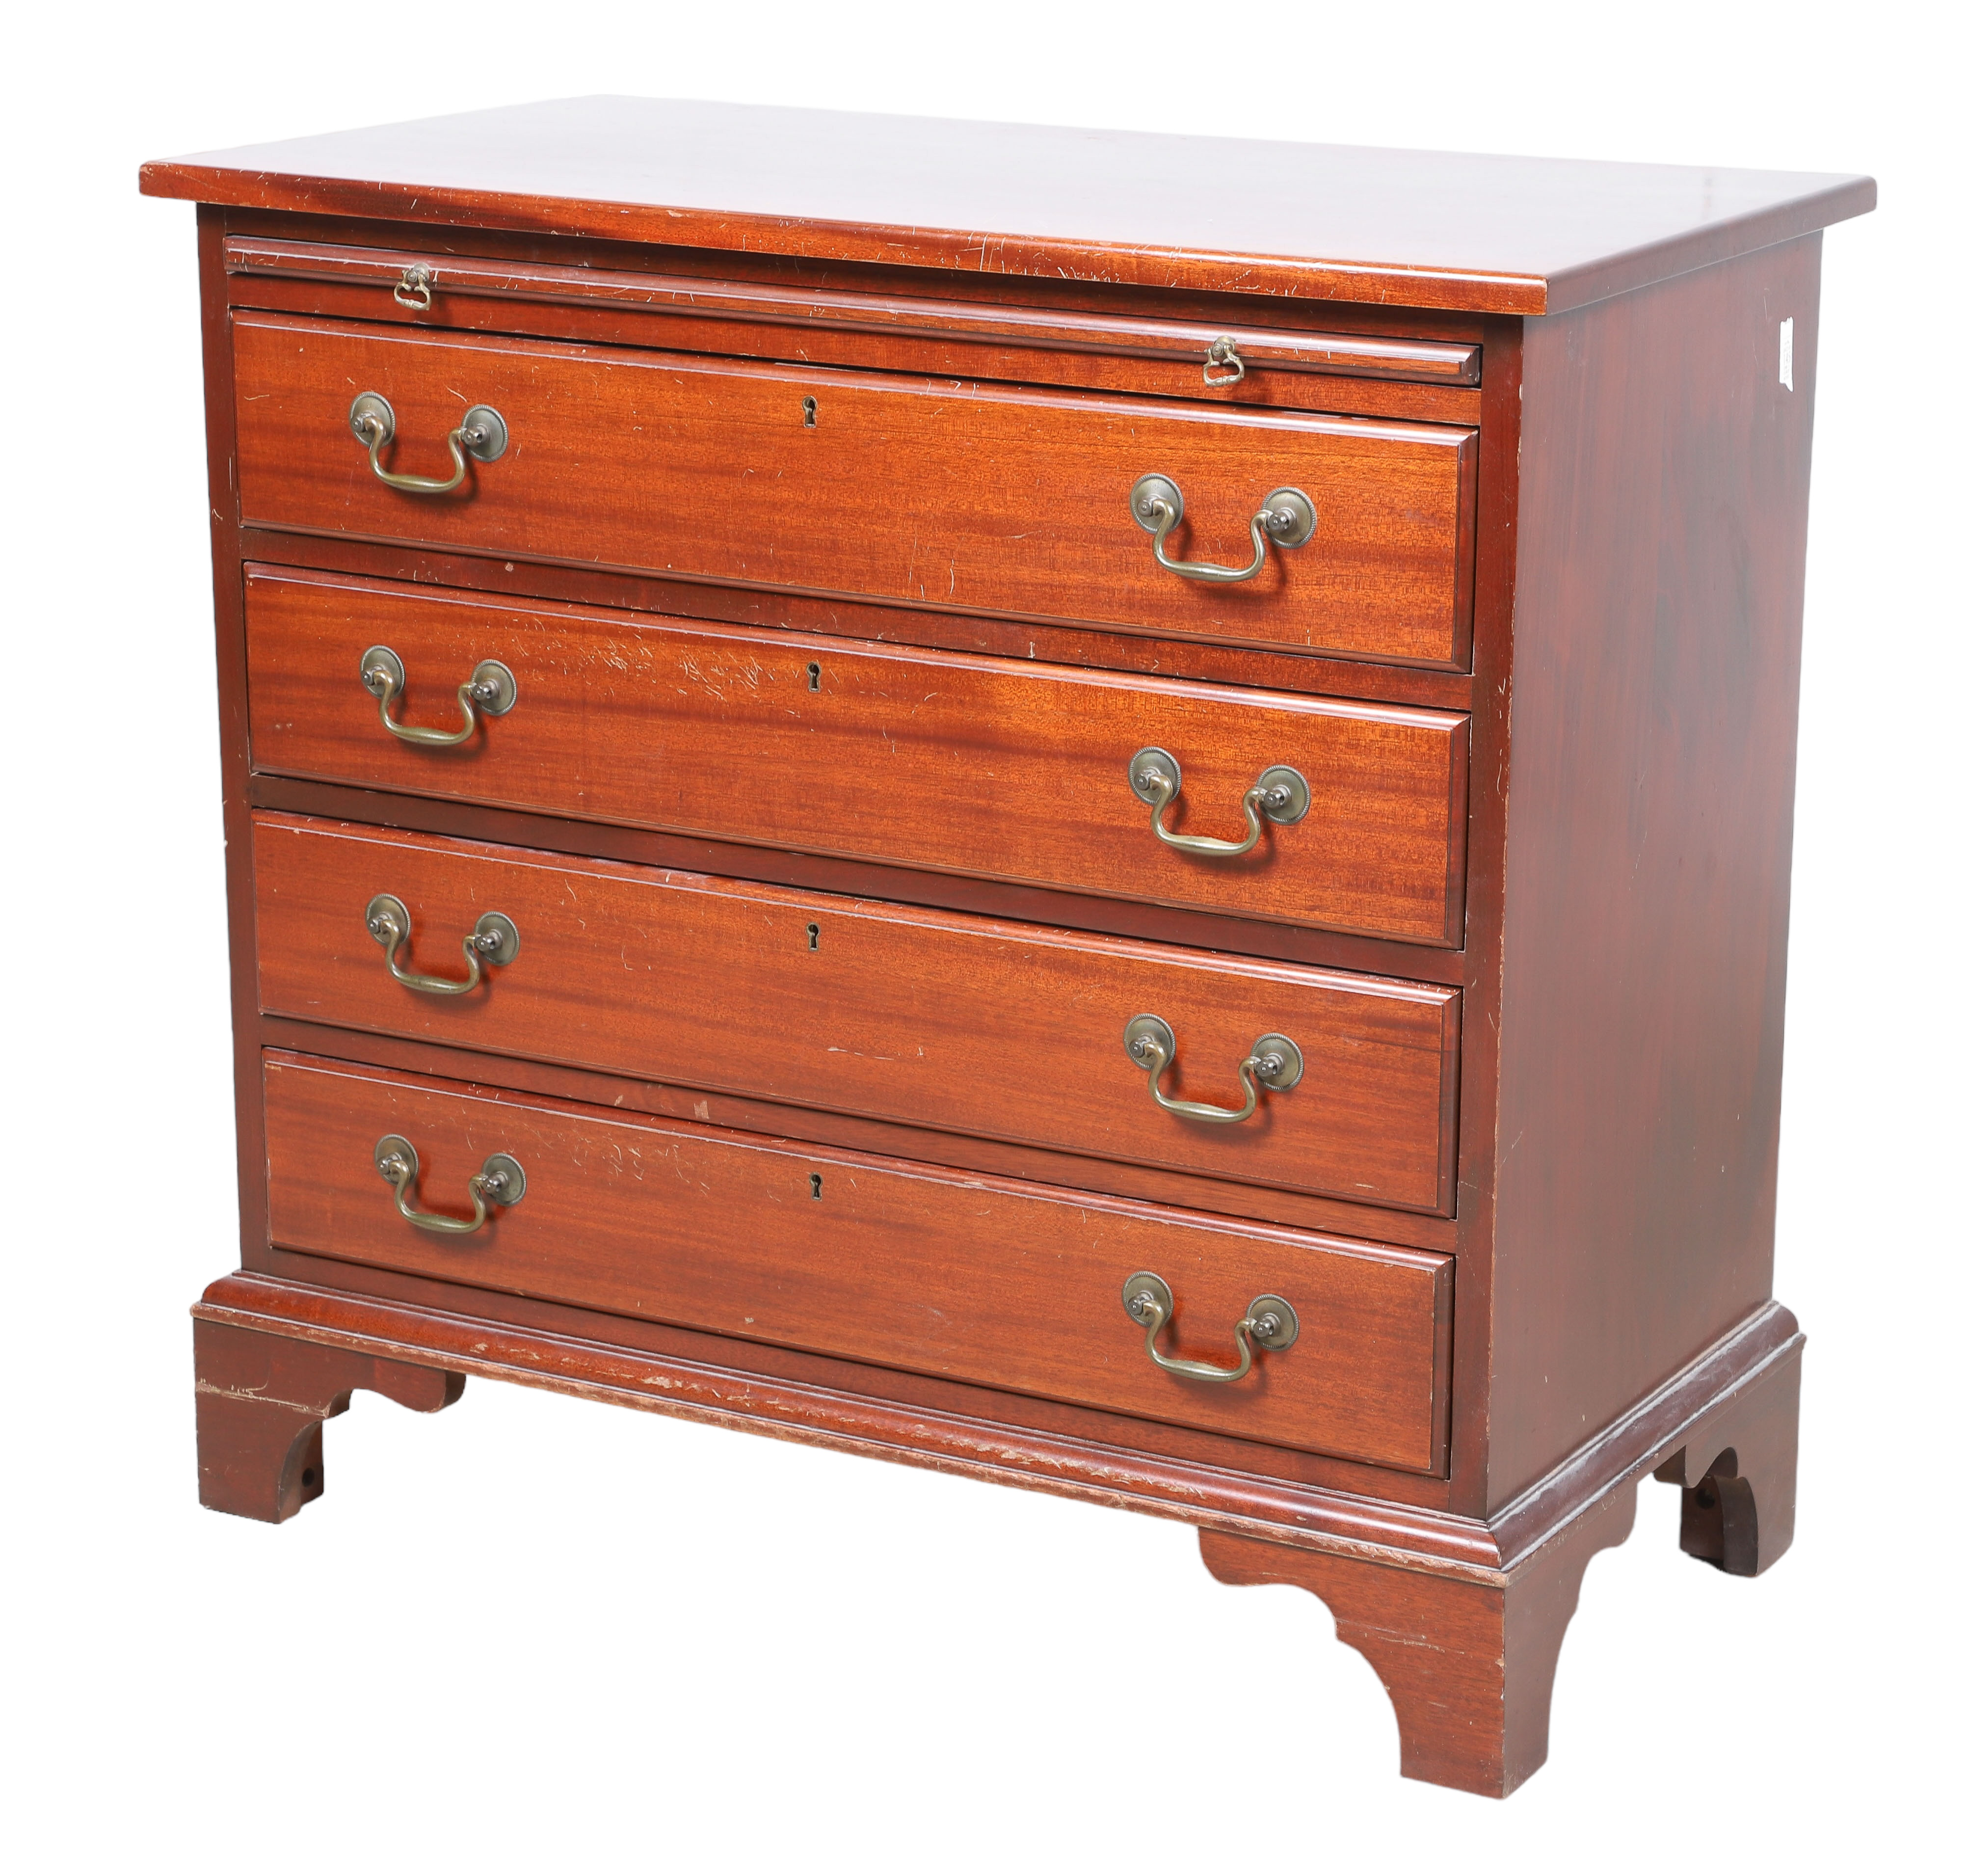 Mahogany bachelors chest, pull out slide